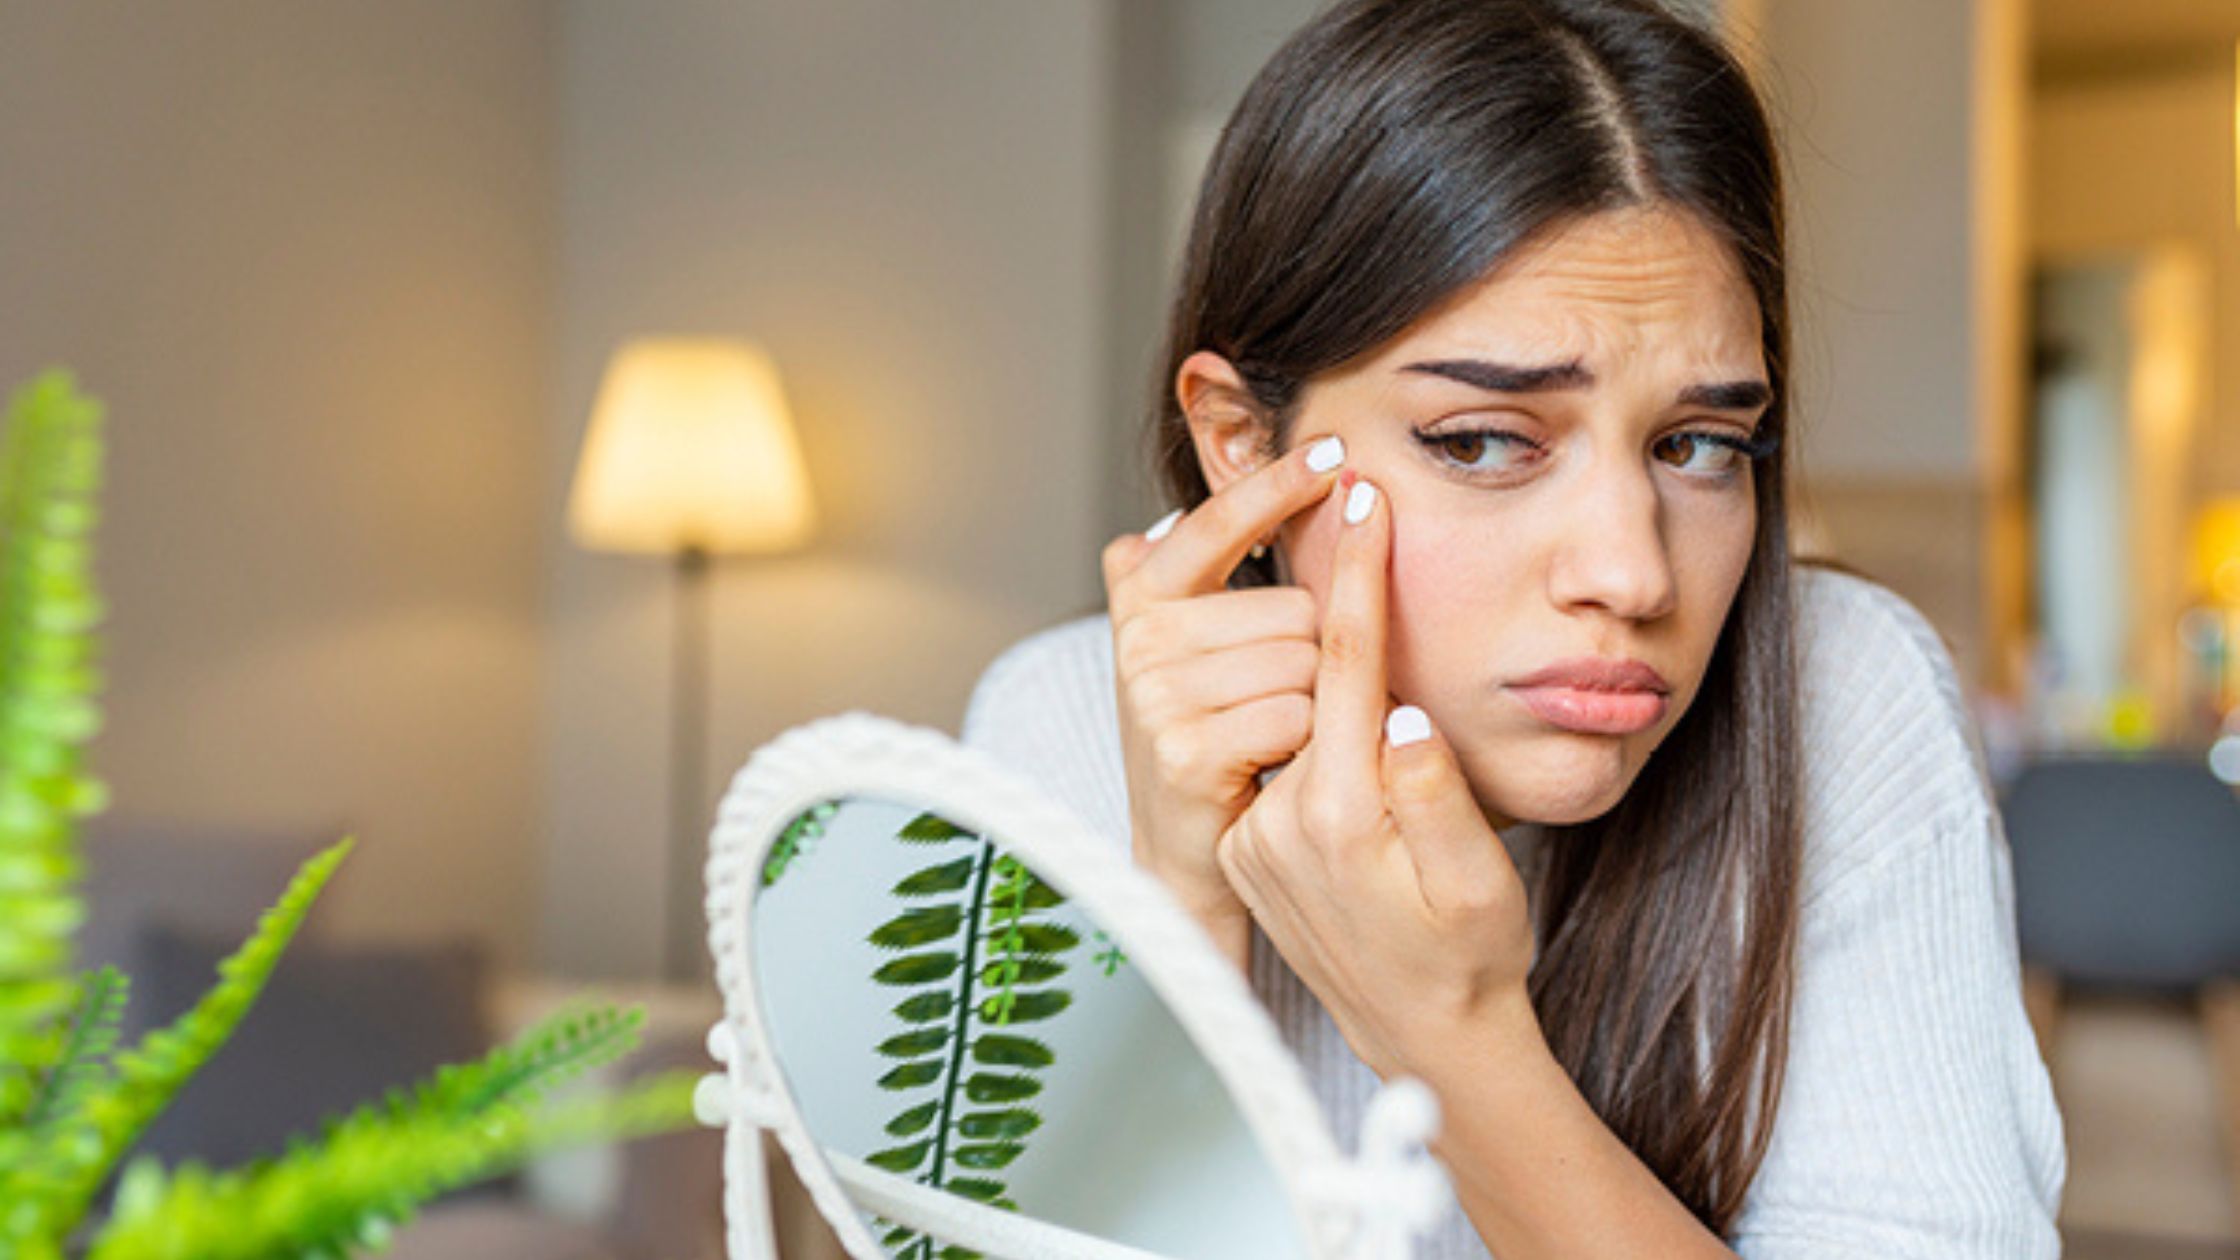 Banishing Blemishes: Transition from Pesky Pimples to Clear Skin with the Best Acne Treatment